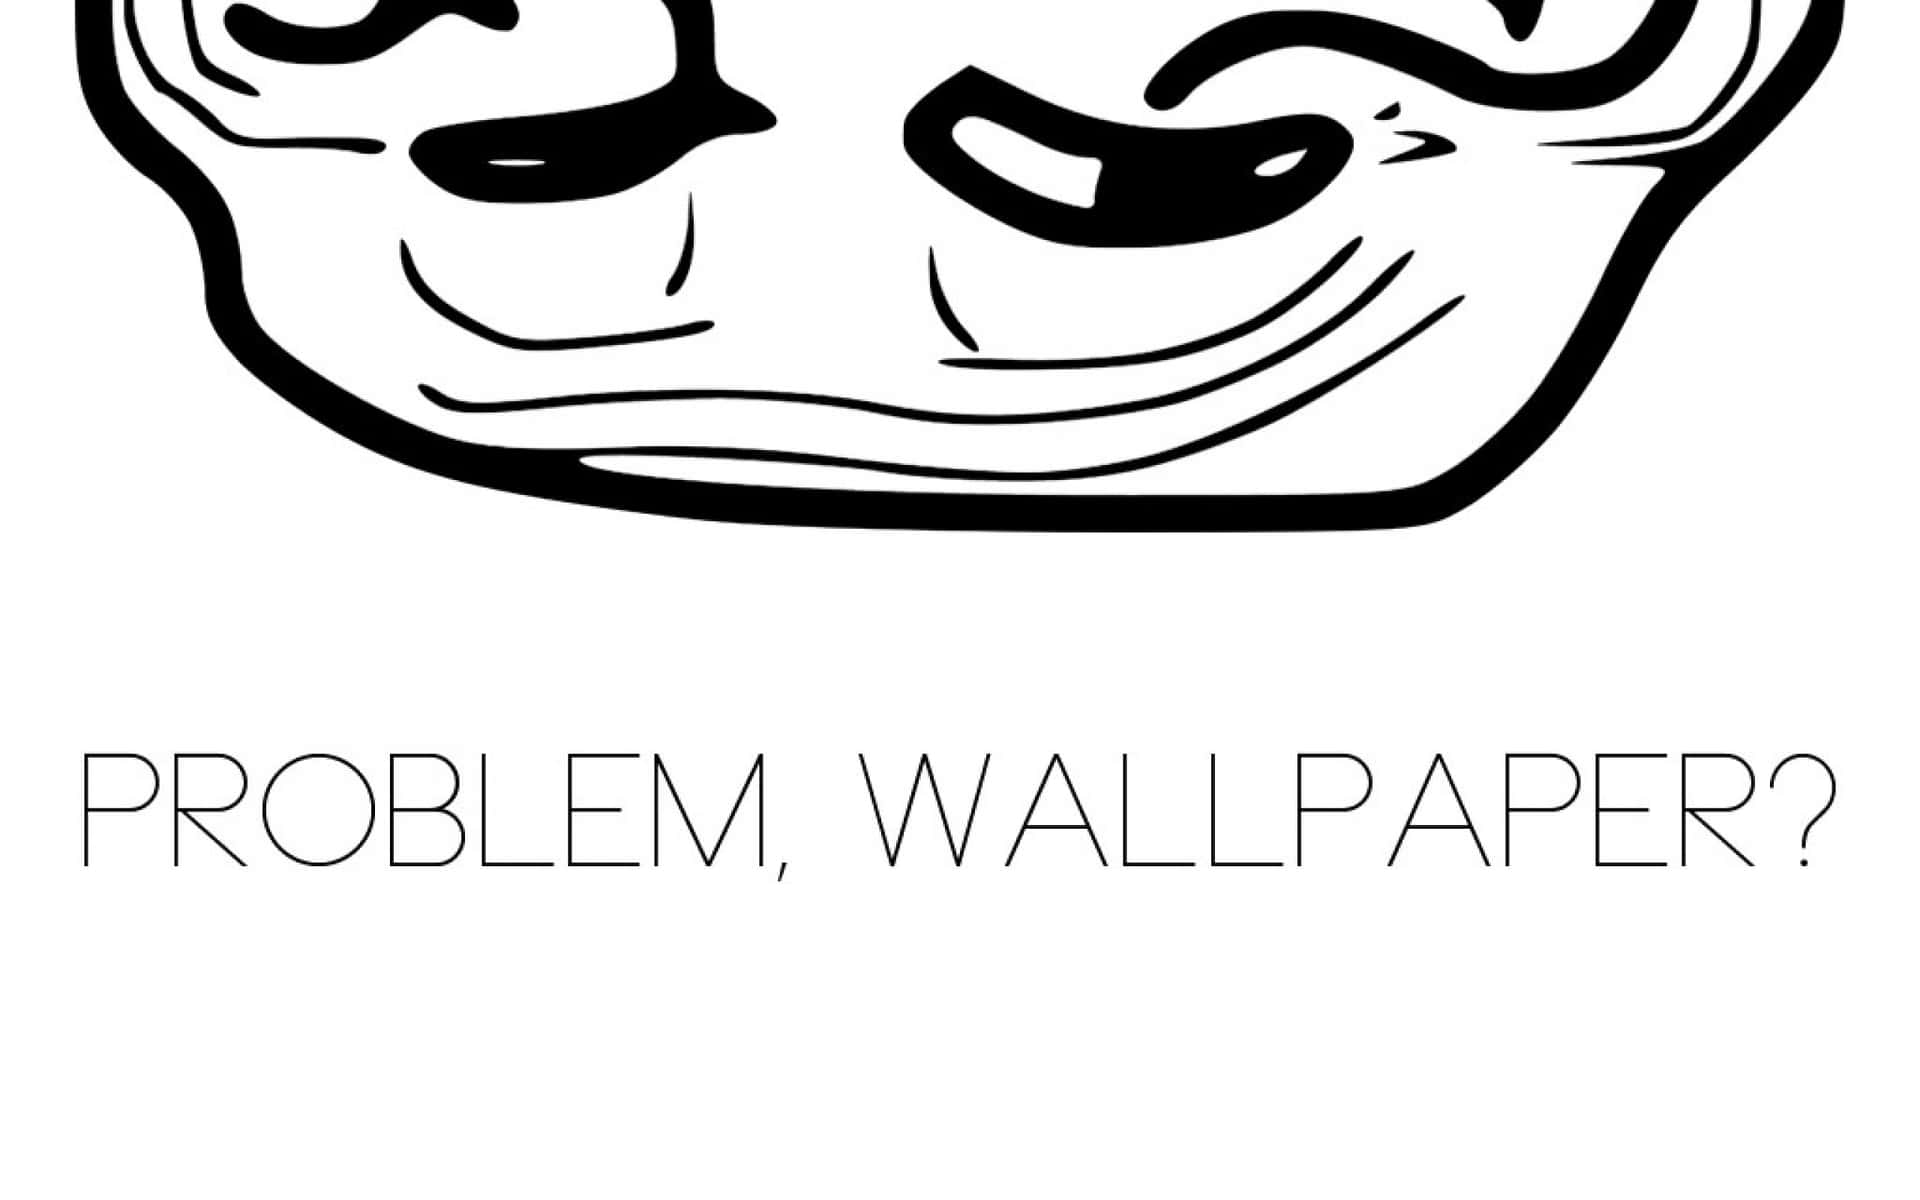 Ironic Statement From A Troll Wallpaper